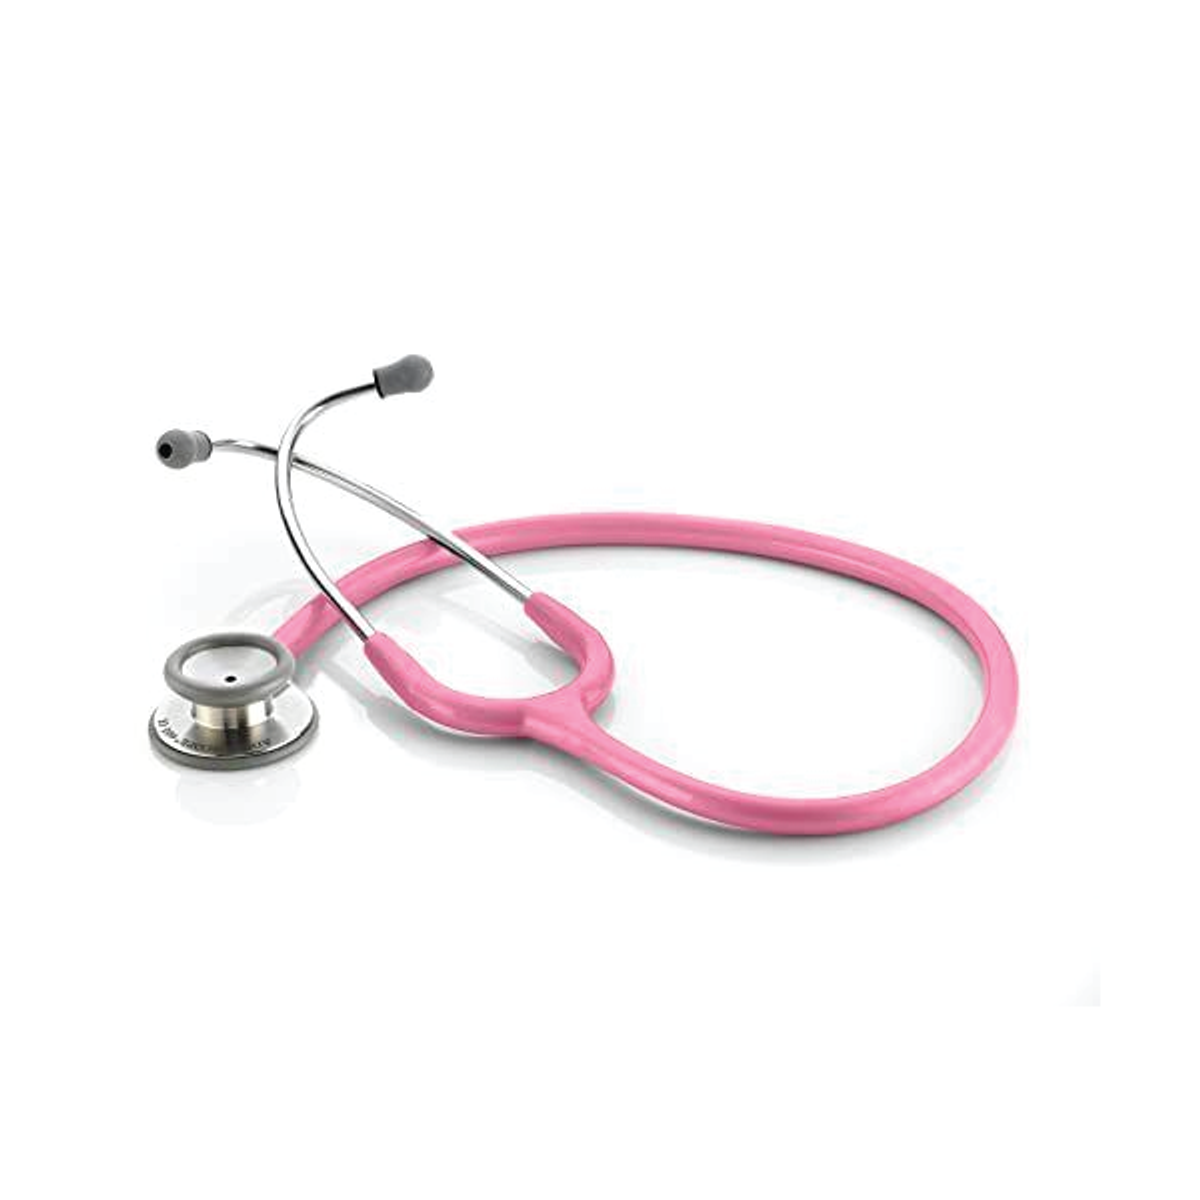 ADC Breast Cancer Awareness Stethoscope